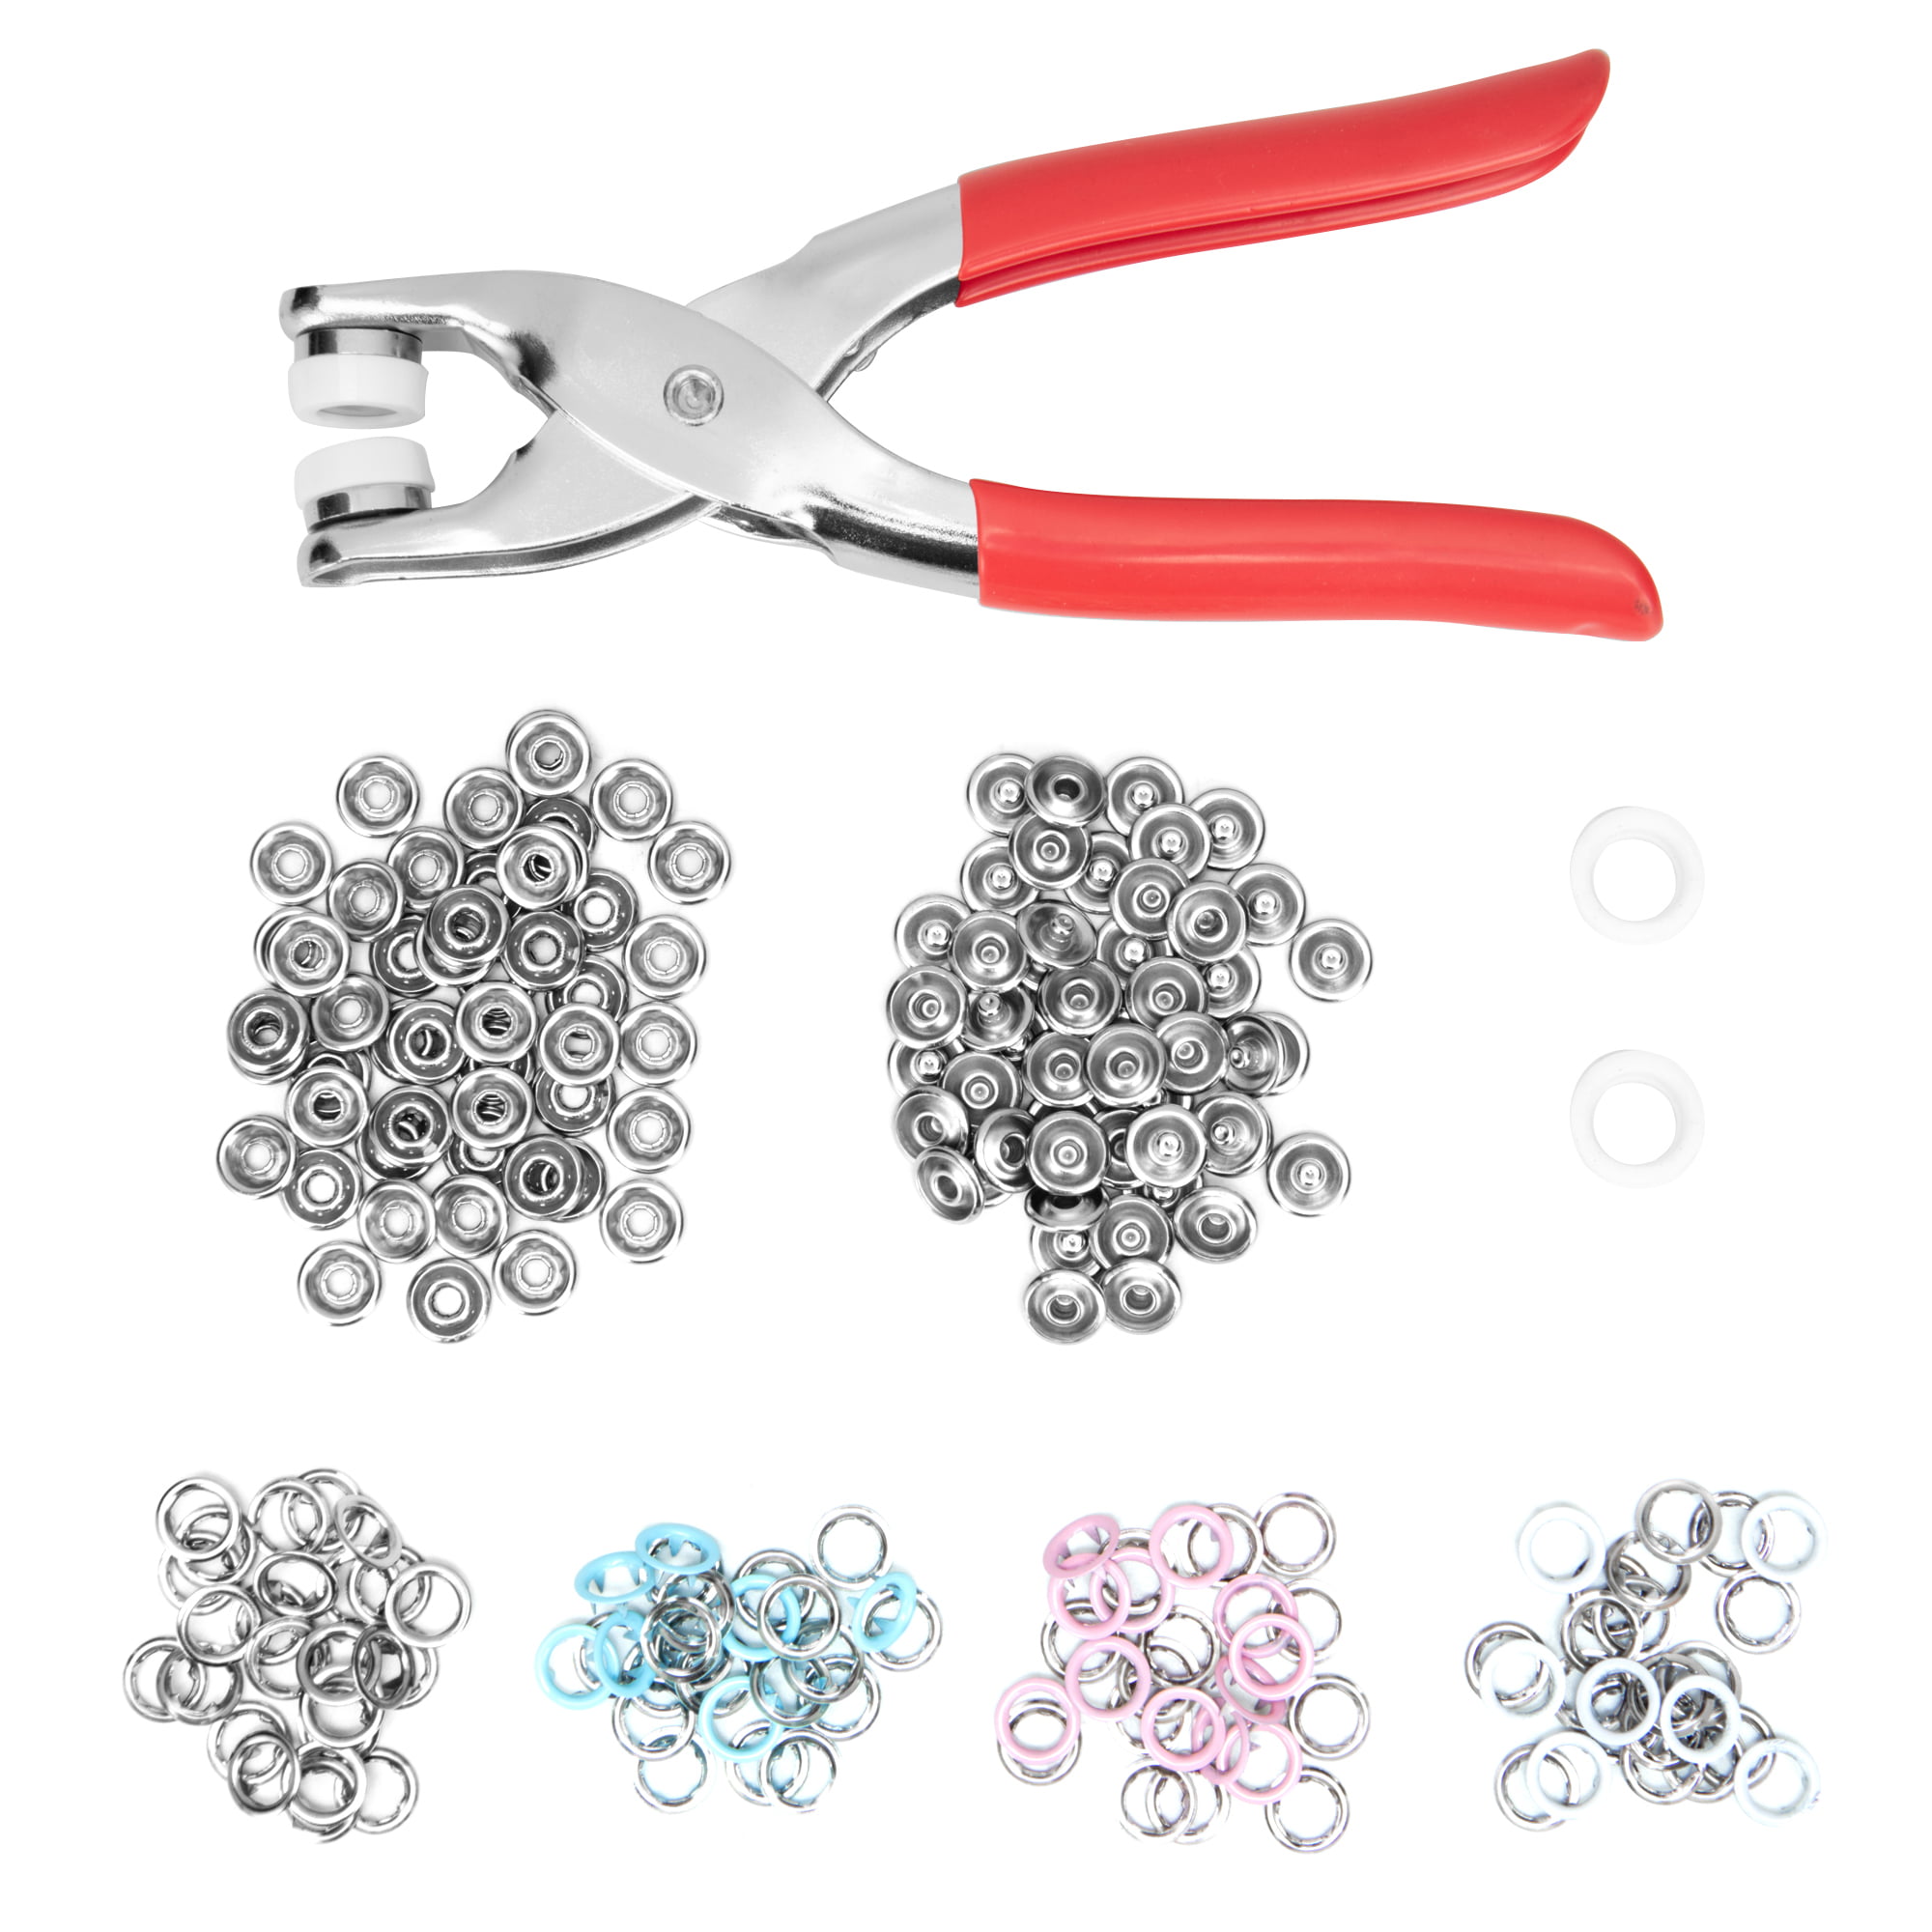 200pcs 9.5mm Prong Pliers Ring Press Studs Popper Fasteners Silver DIY Tool 